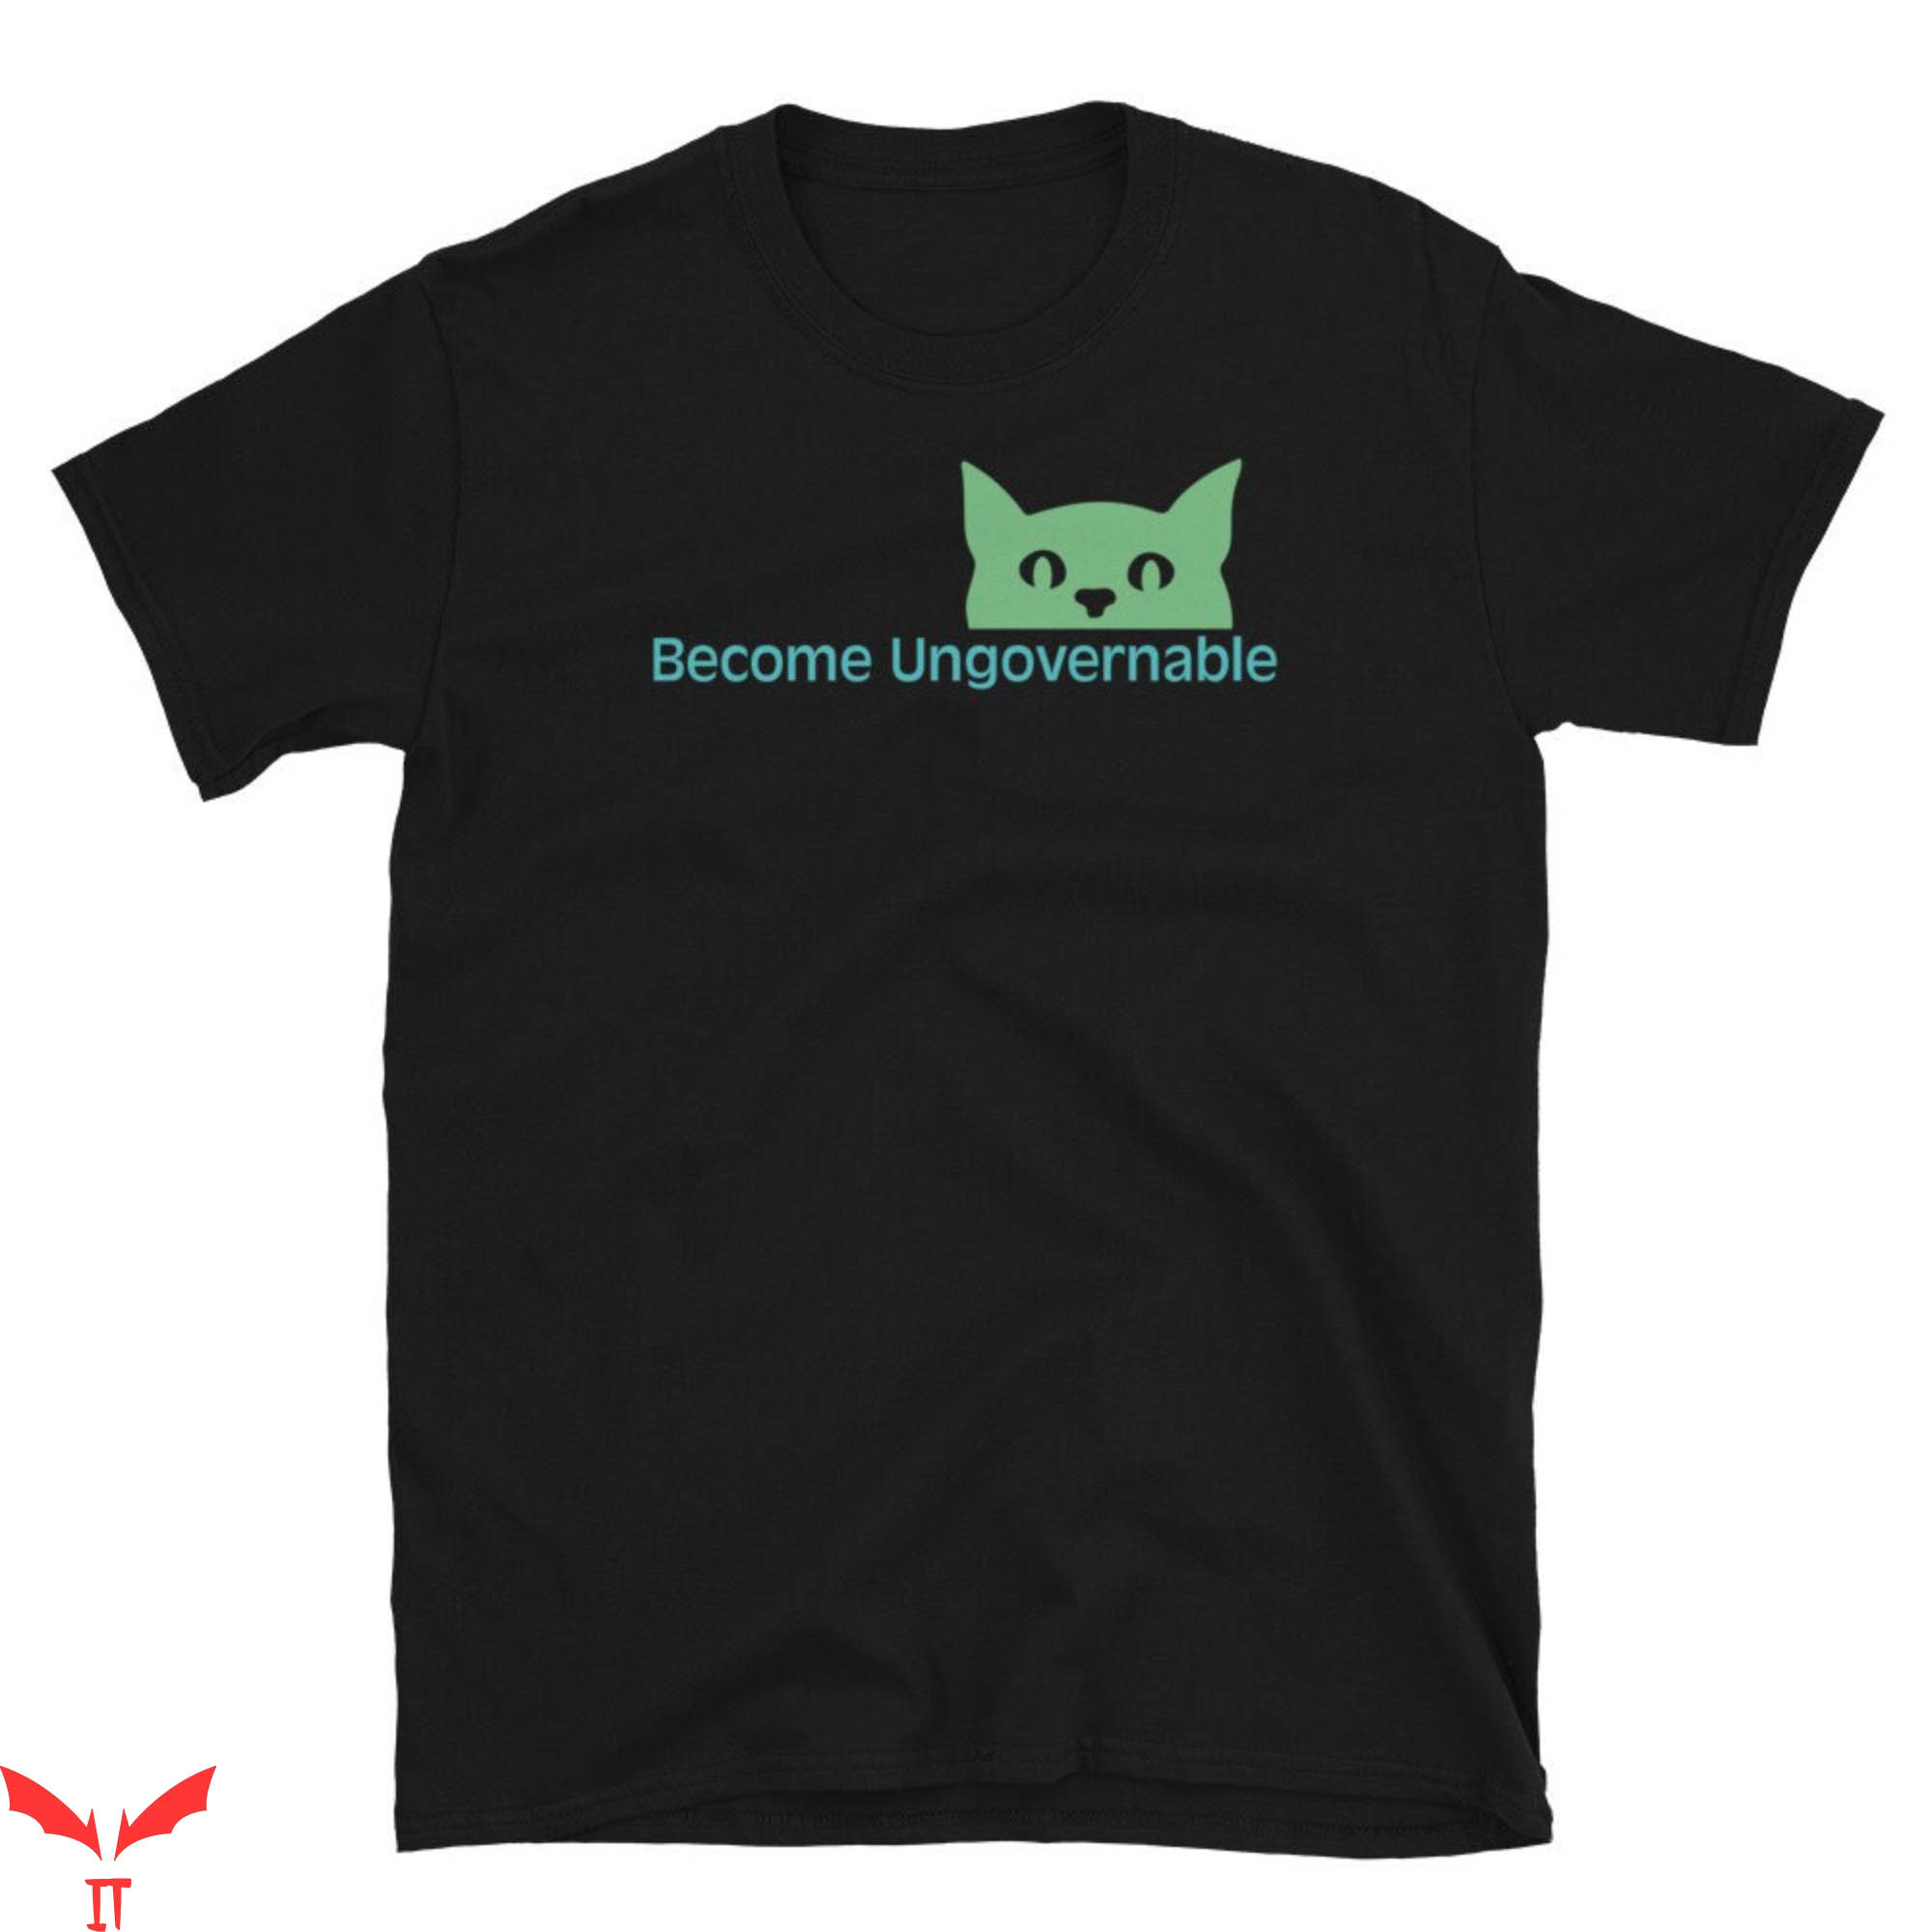 Become Ungovernable T-Shirt Cat Punk Rock Human Rights